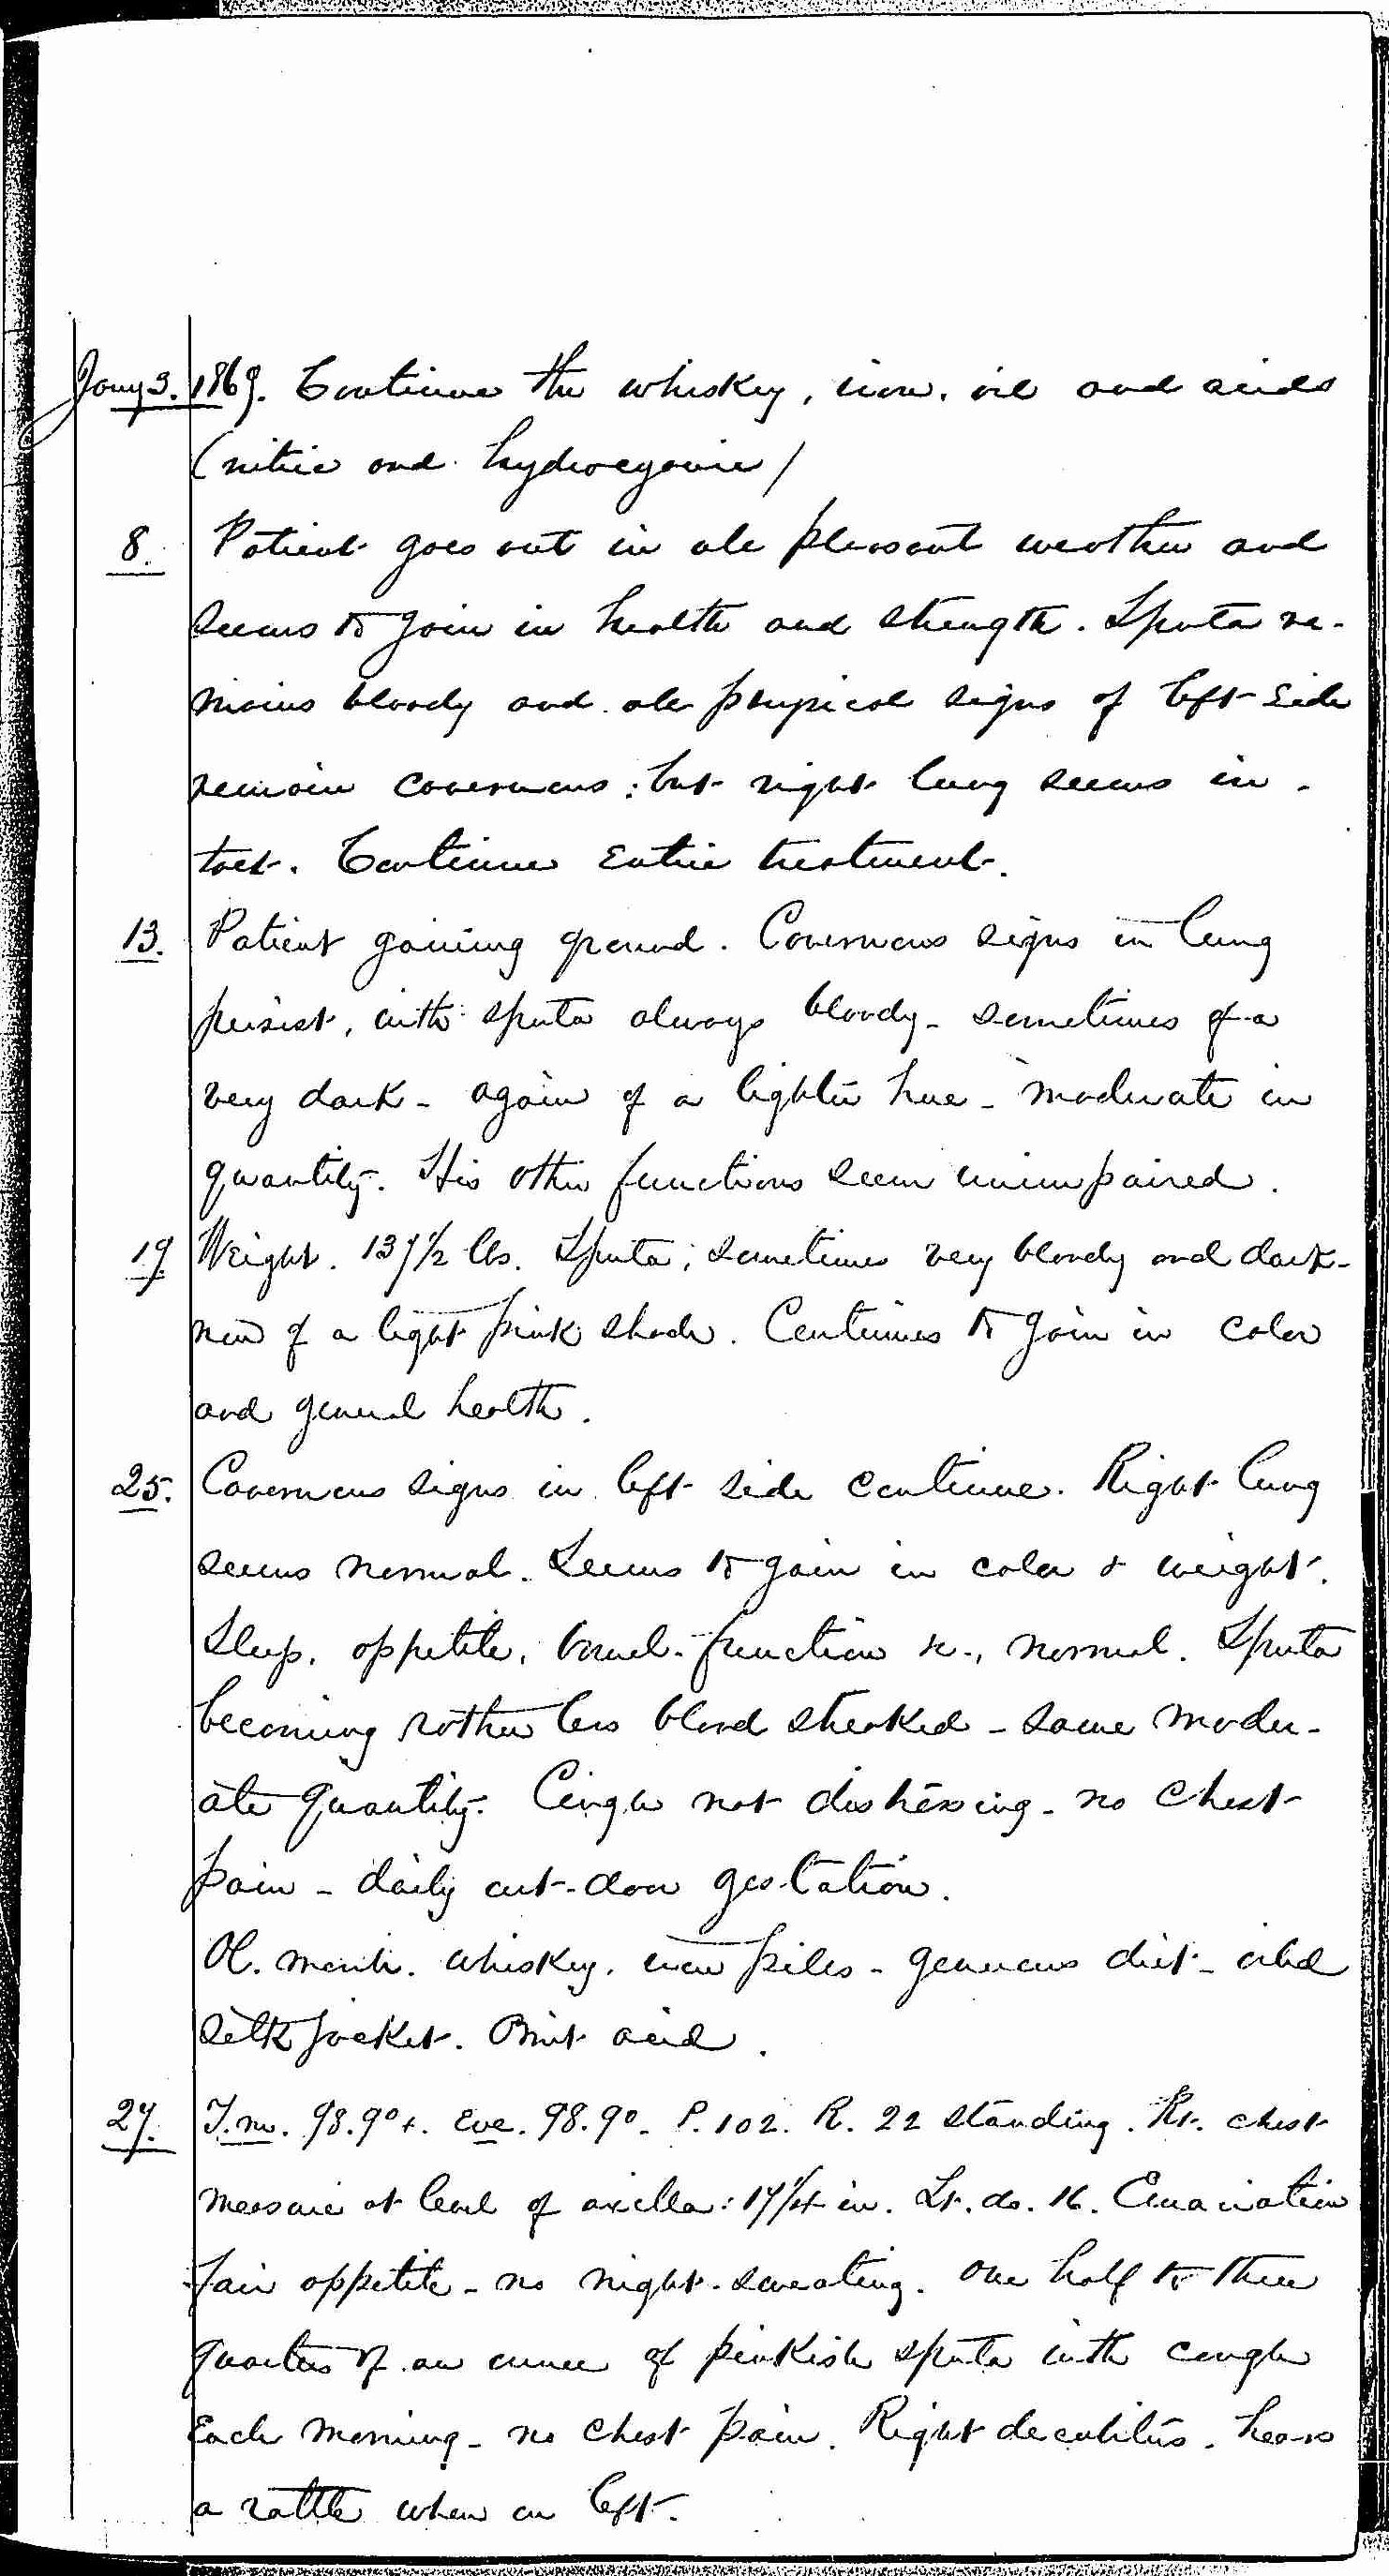 Entry for Bernard Drury (page 23 of 31) in the log Hospital Tickets and Case Papers - Naval Hospital - Washington, D.C. - 1868-69